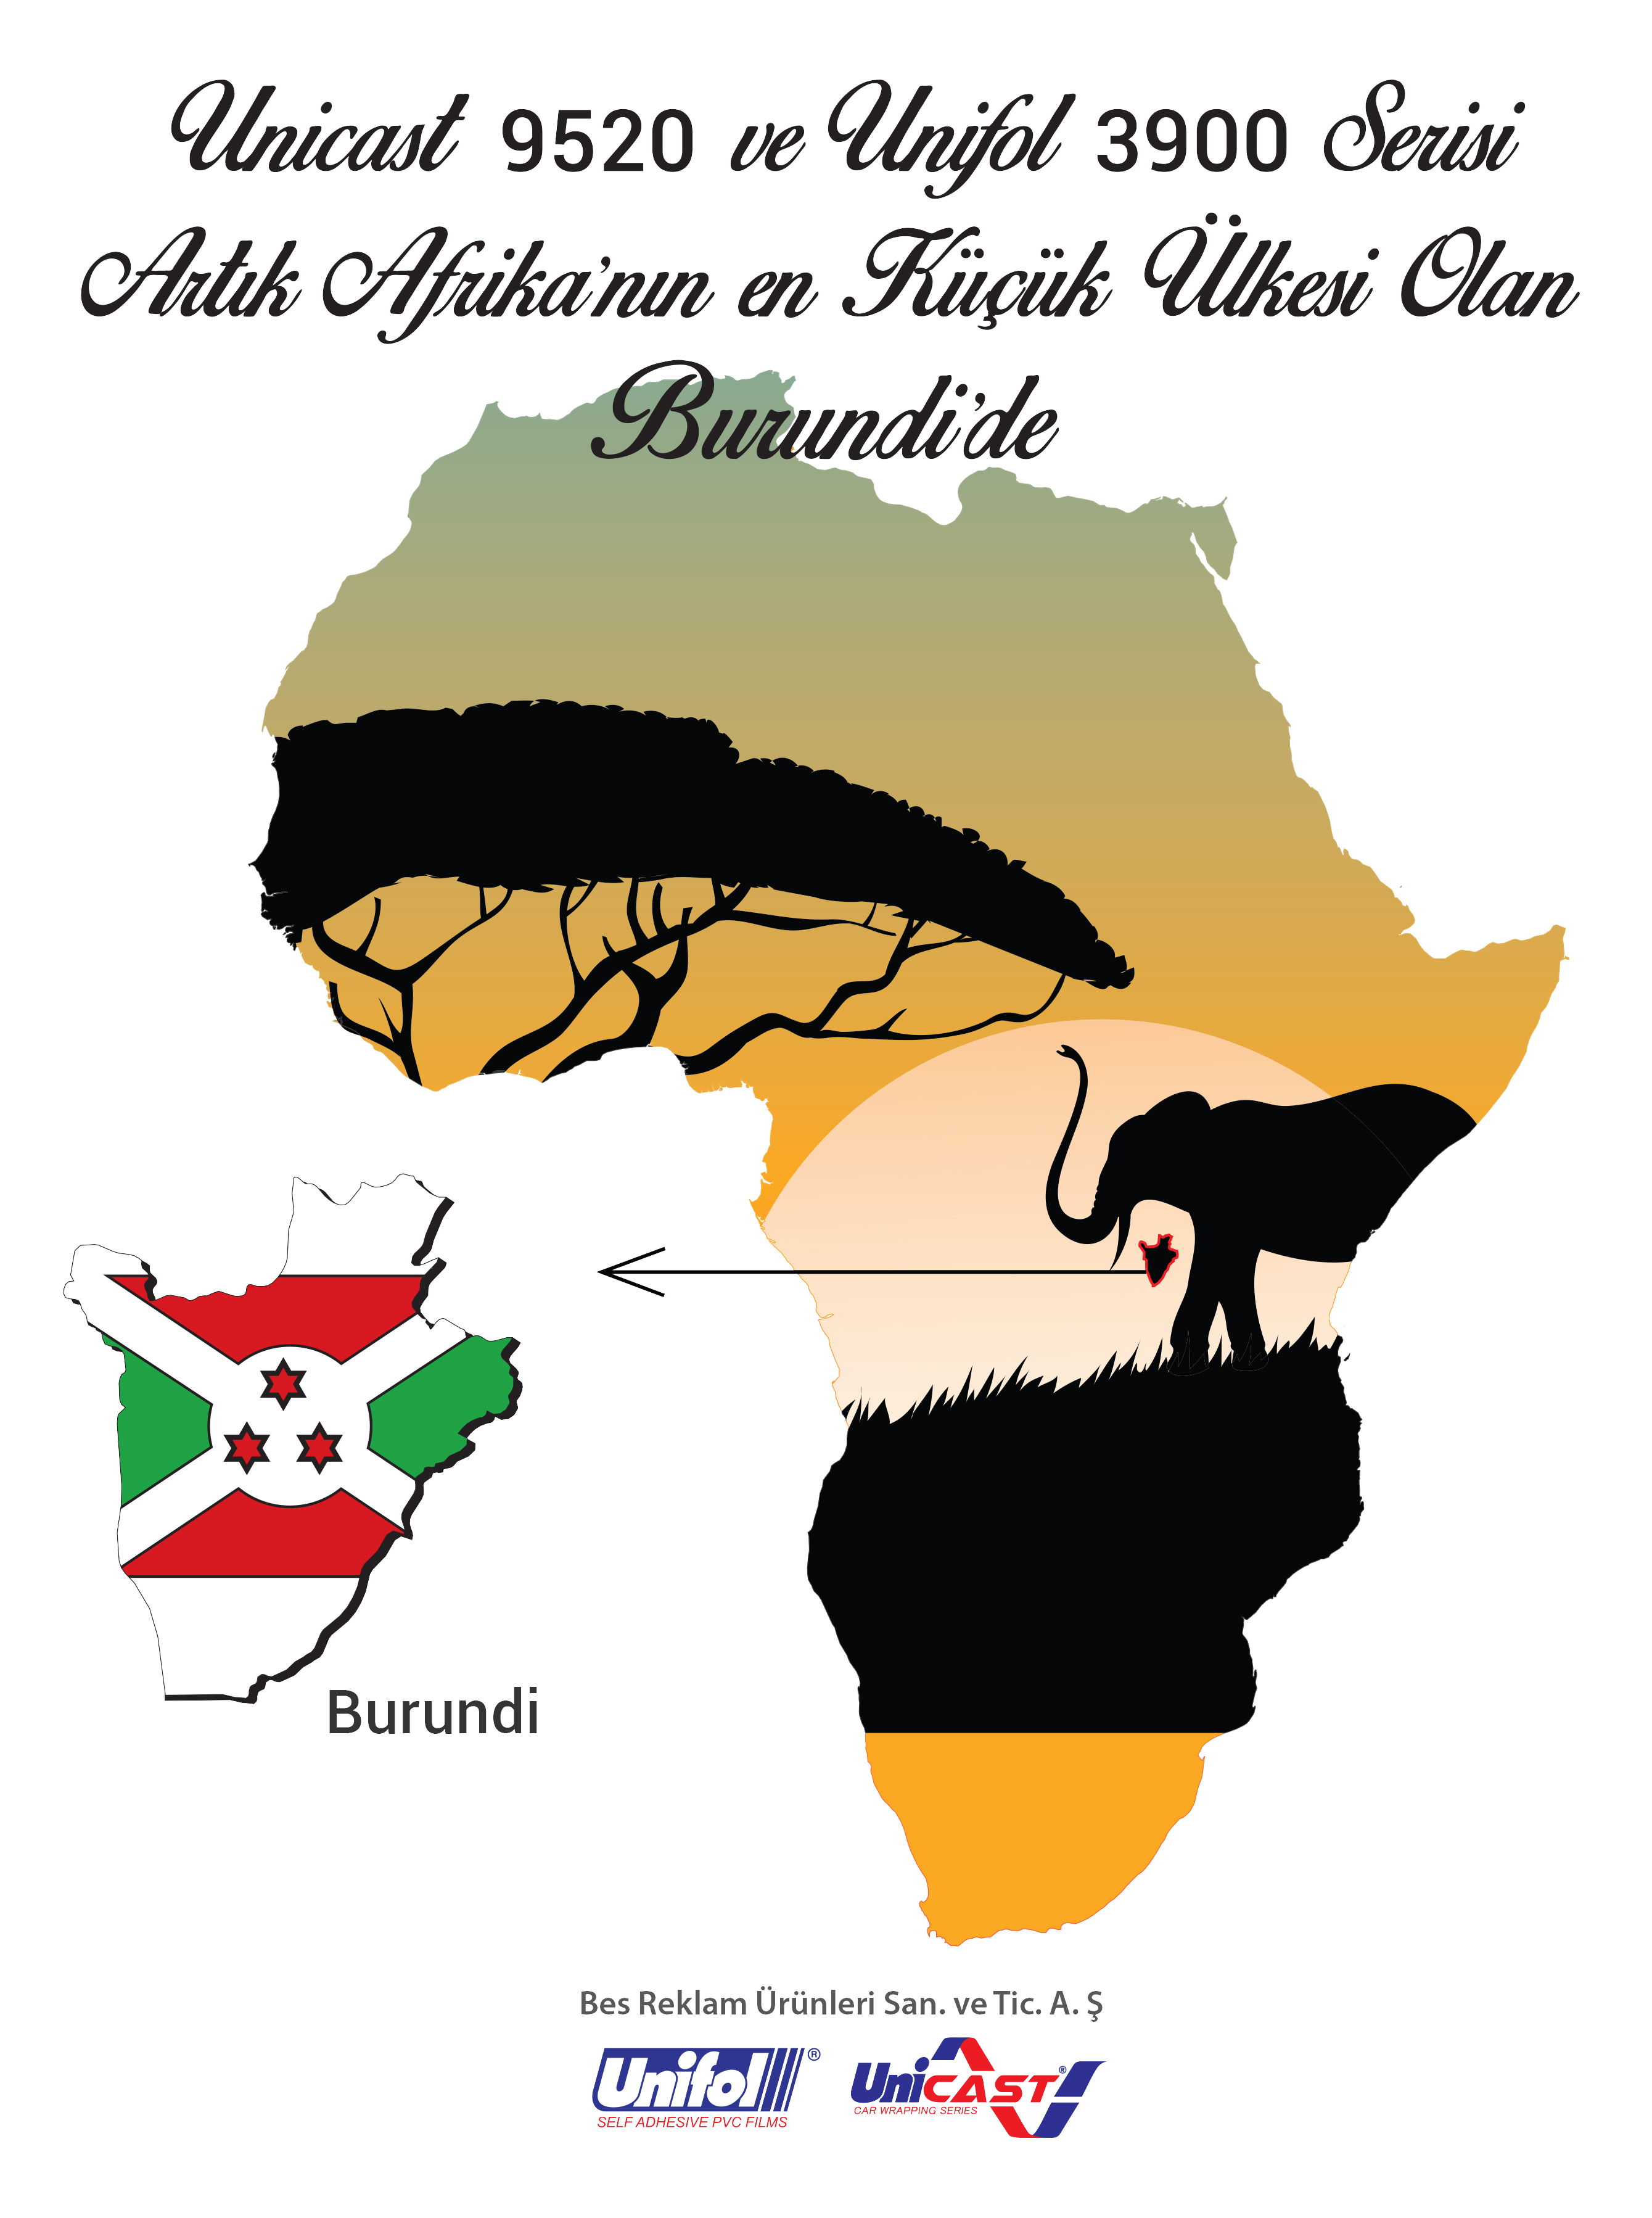 Unifol 9520 and 3900 series are now in Brundi which is the smallest country in Africa